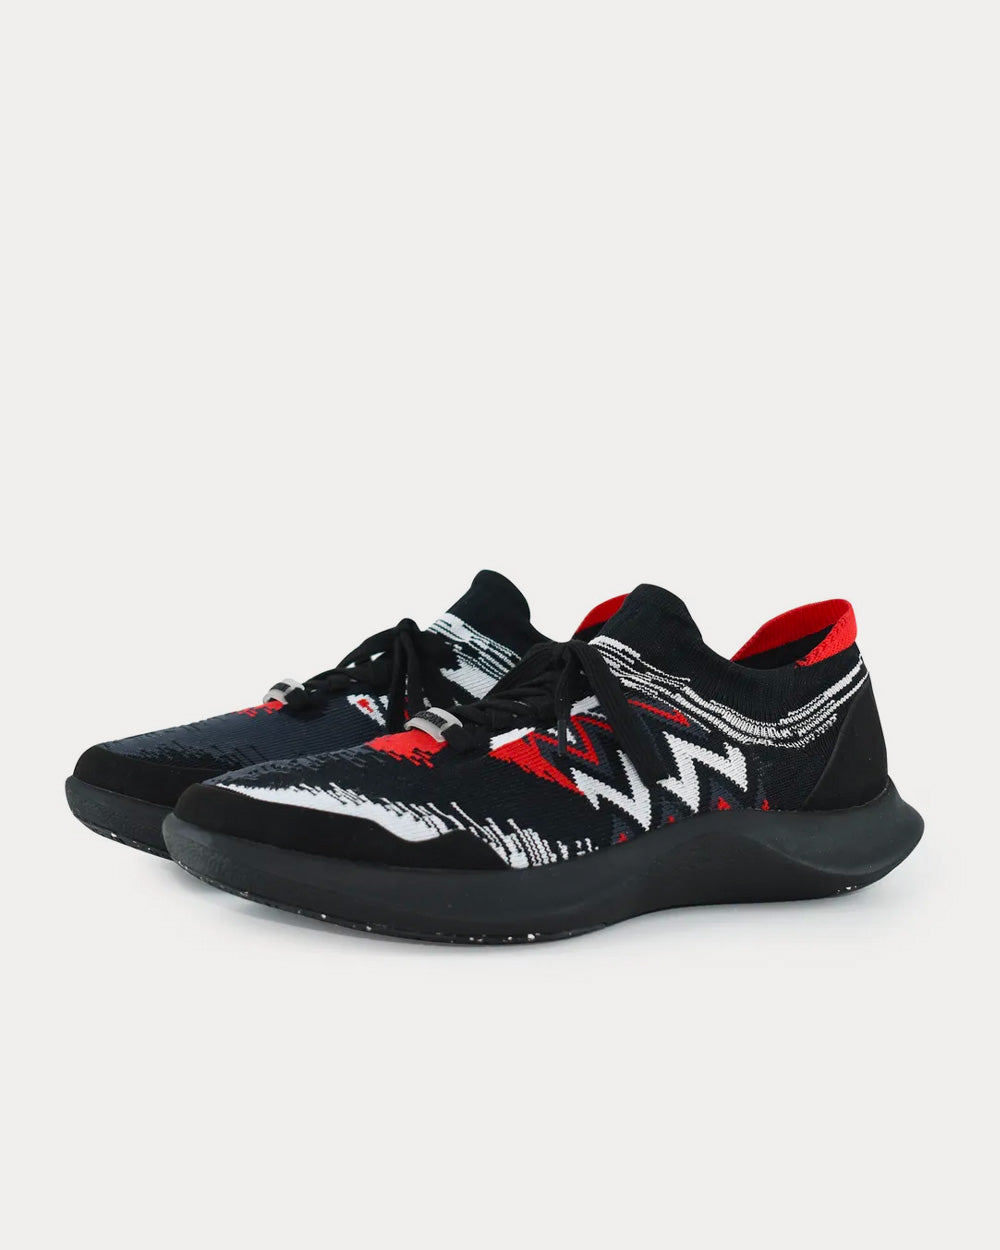 Missoni x ACBC - Fly Red / Black Low Top Sneakers